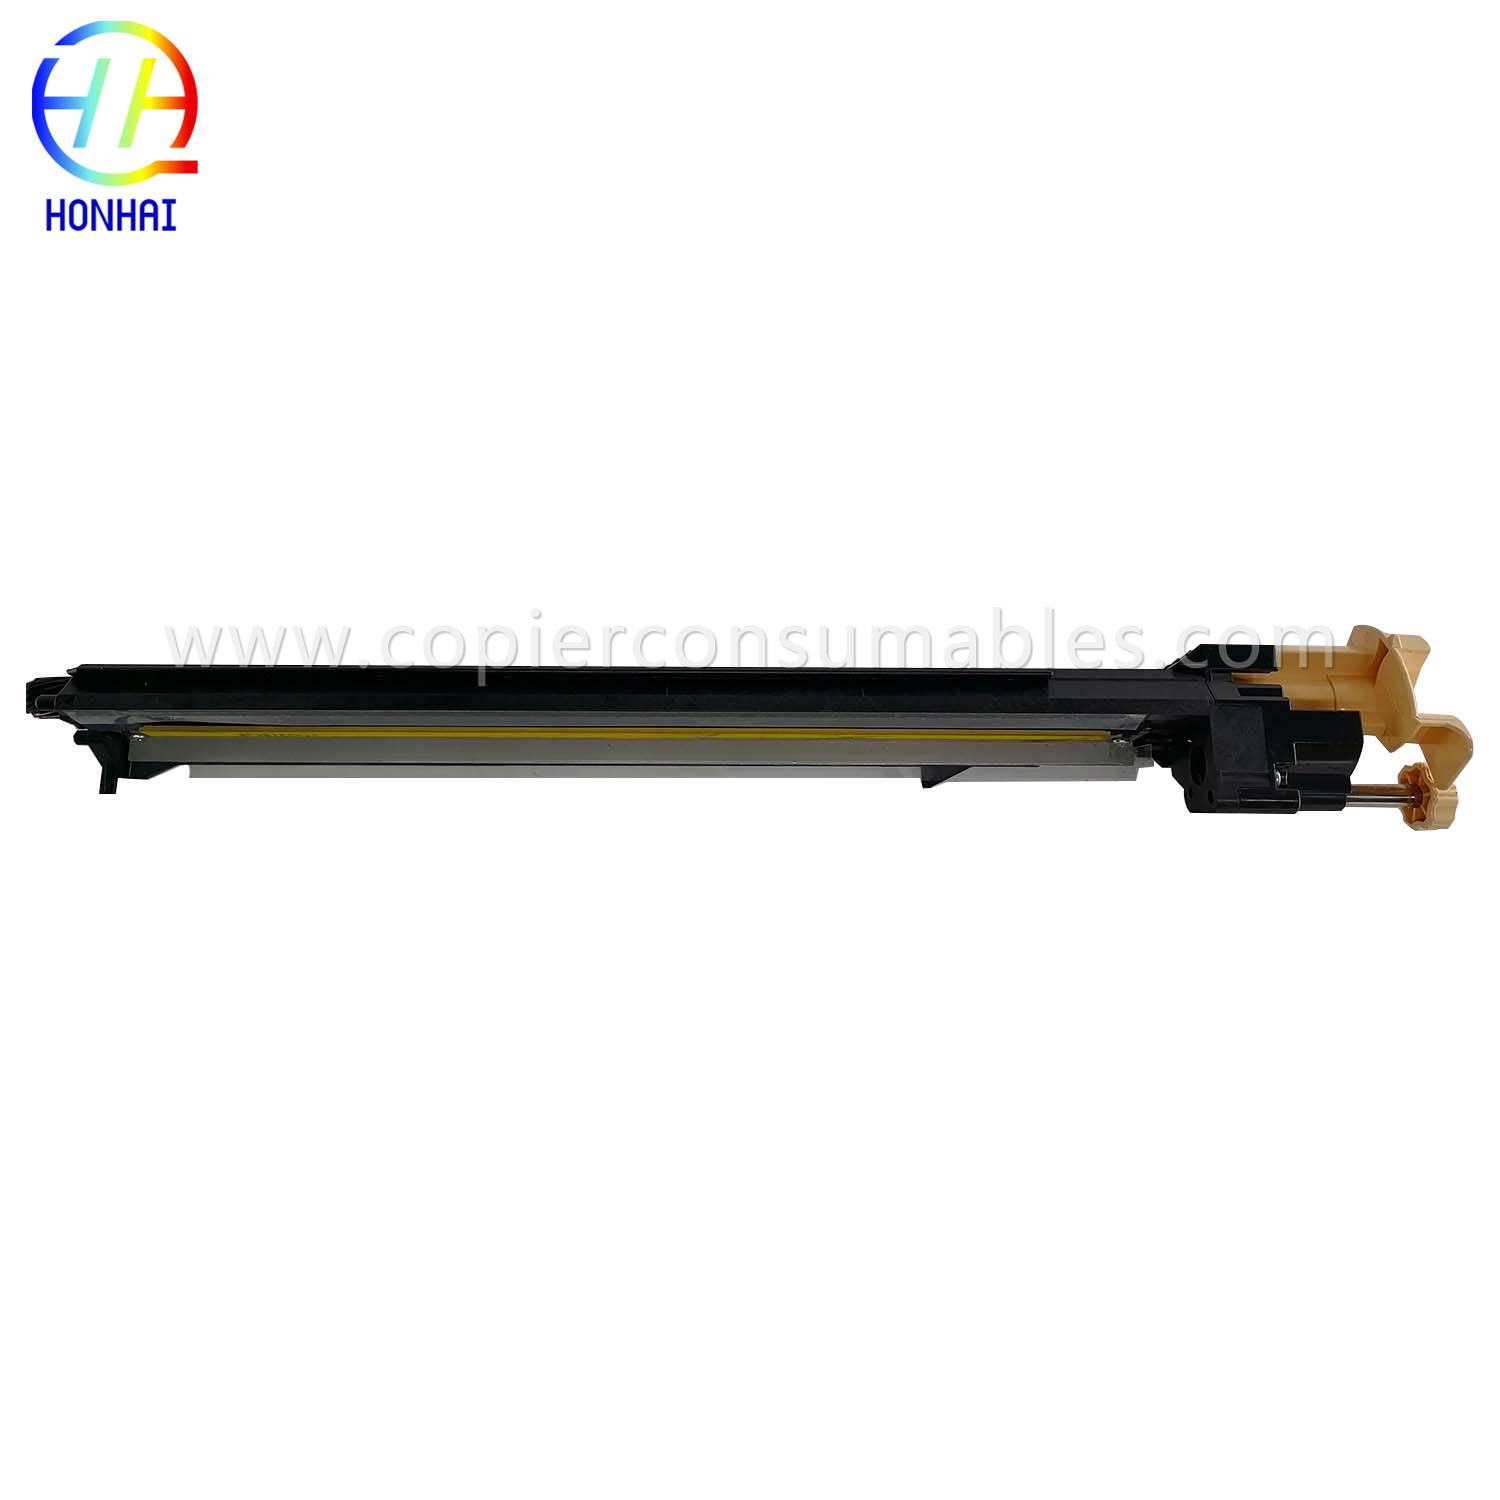 Transfer Belt Cleaning Assembly for Xerox C2270 C2275 C3370 C3371 C3373 C3375 042K94851